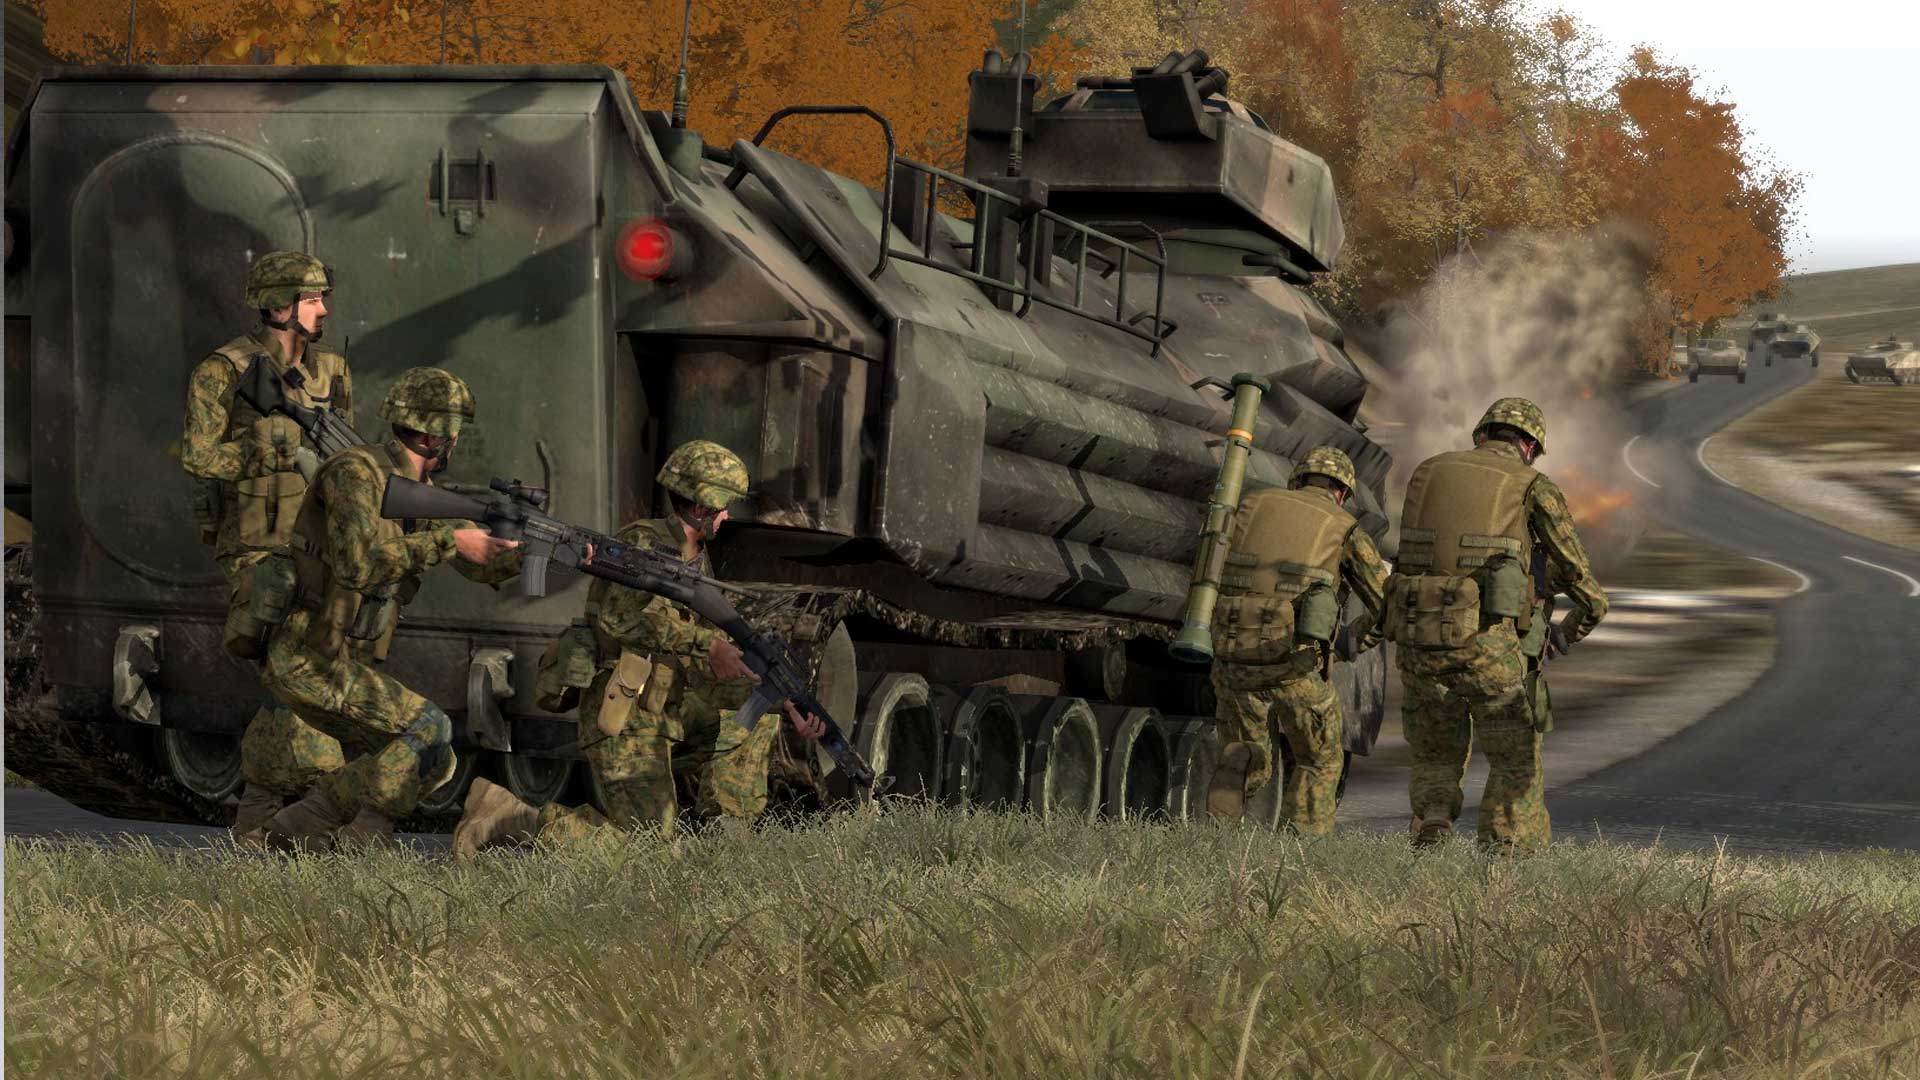 Арма механики. Арма 2 combined Operations. Arma Armed Assault 2. Arma 2 Army of the Czech Republic. Arma 2: combined Operations (2010).